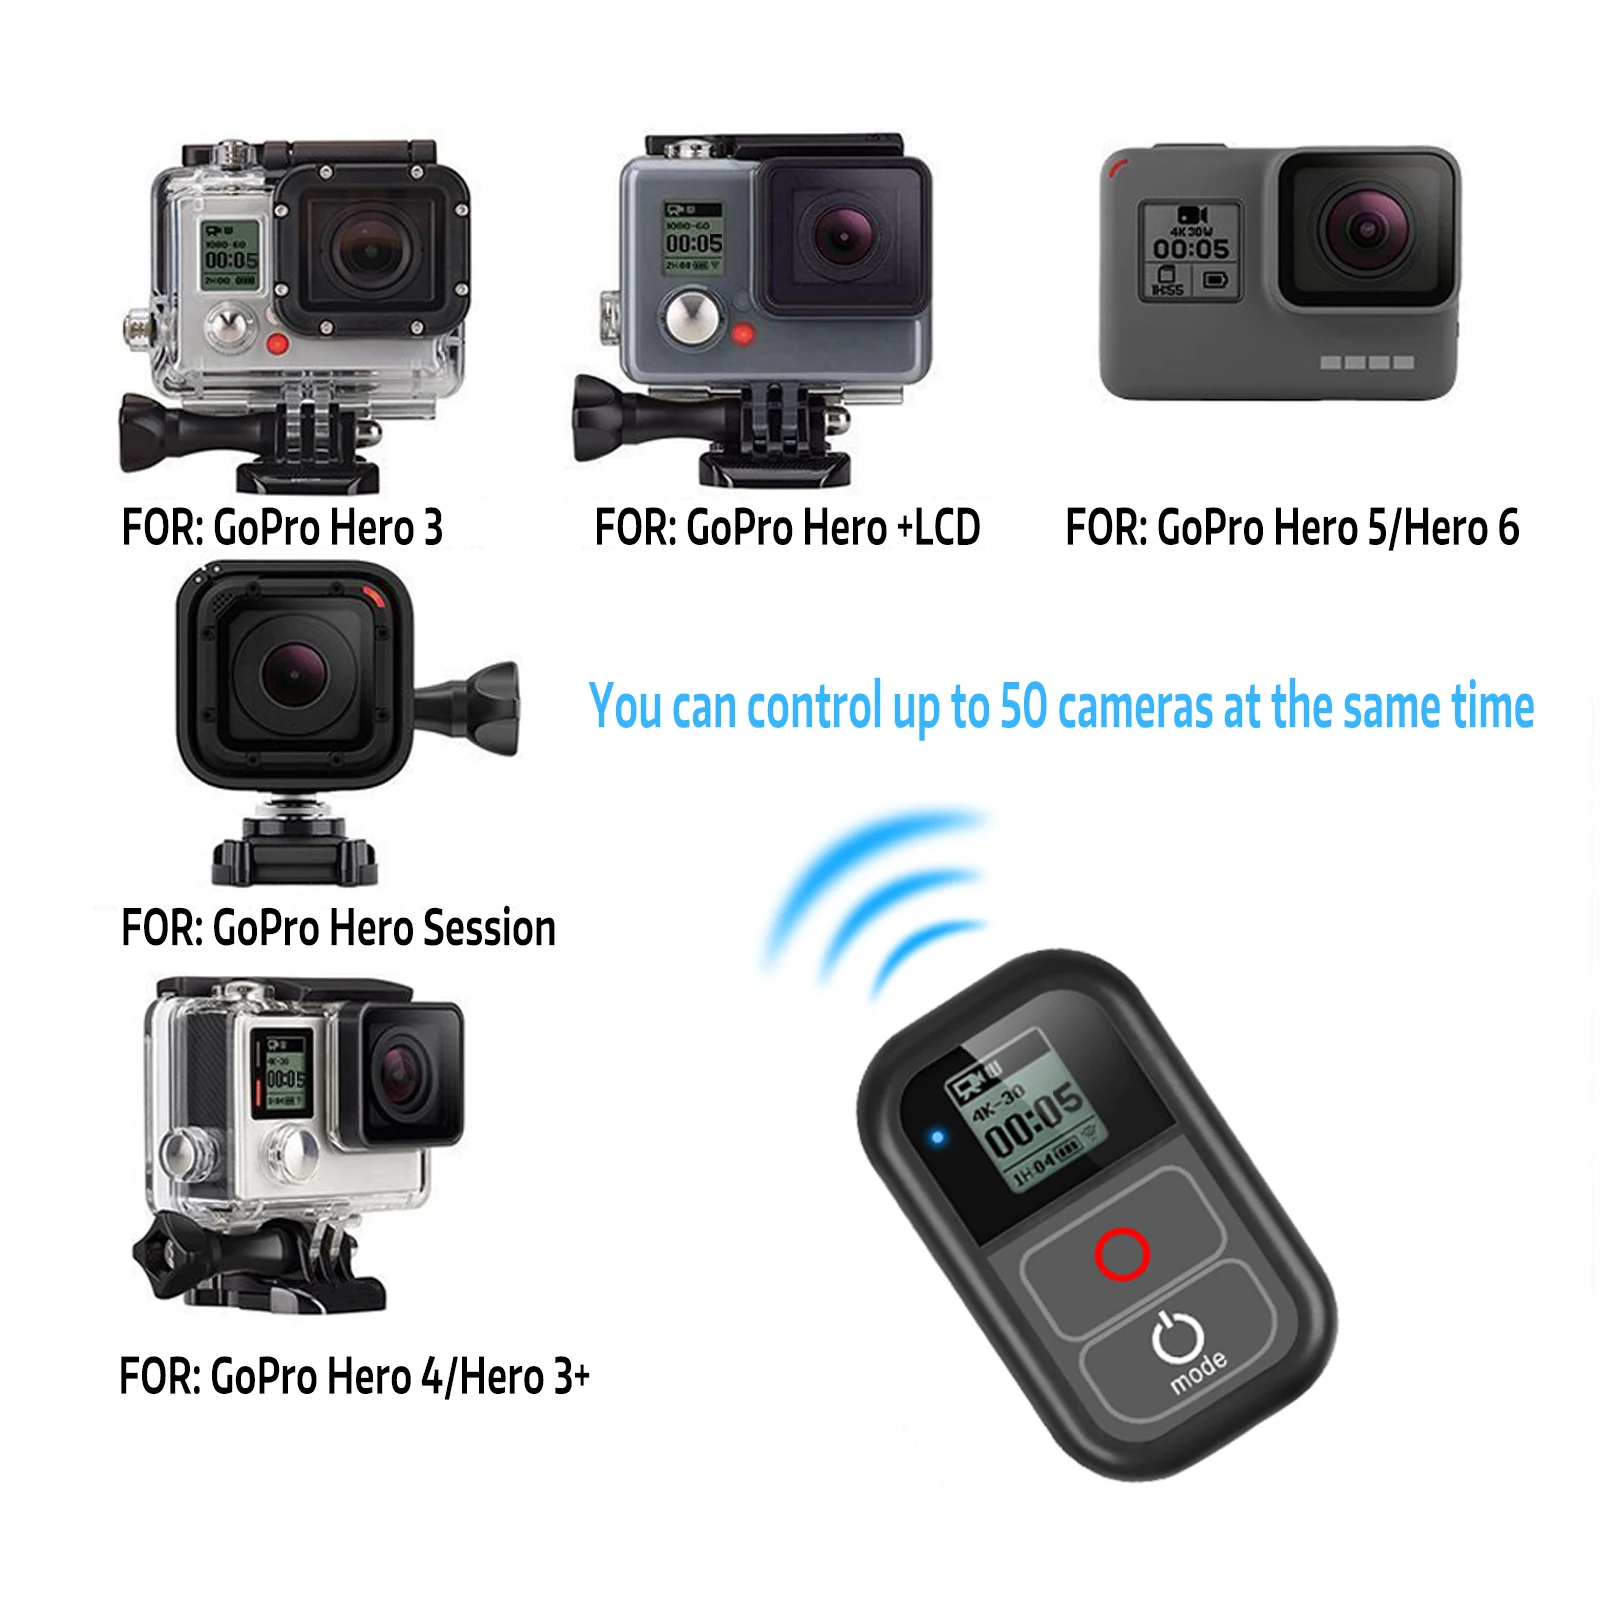 Shoot For Gopro Wifi Remote Control With Charger Cable Wireless Waterproof Remoter For Gopro Hero 9 8 7 6 5 Black 4 3 Accessory Buy Wifi Remote For Gopro Remoter For Gopro